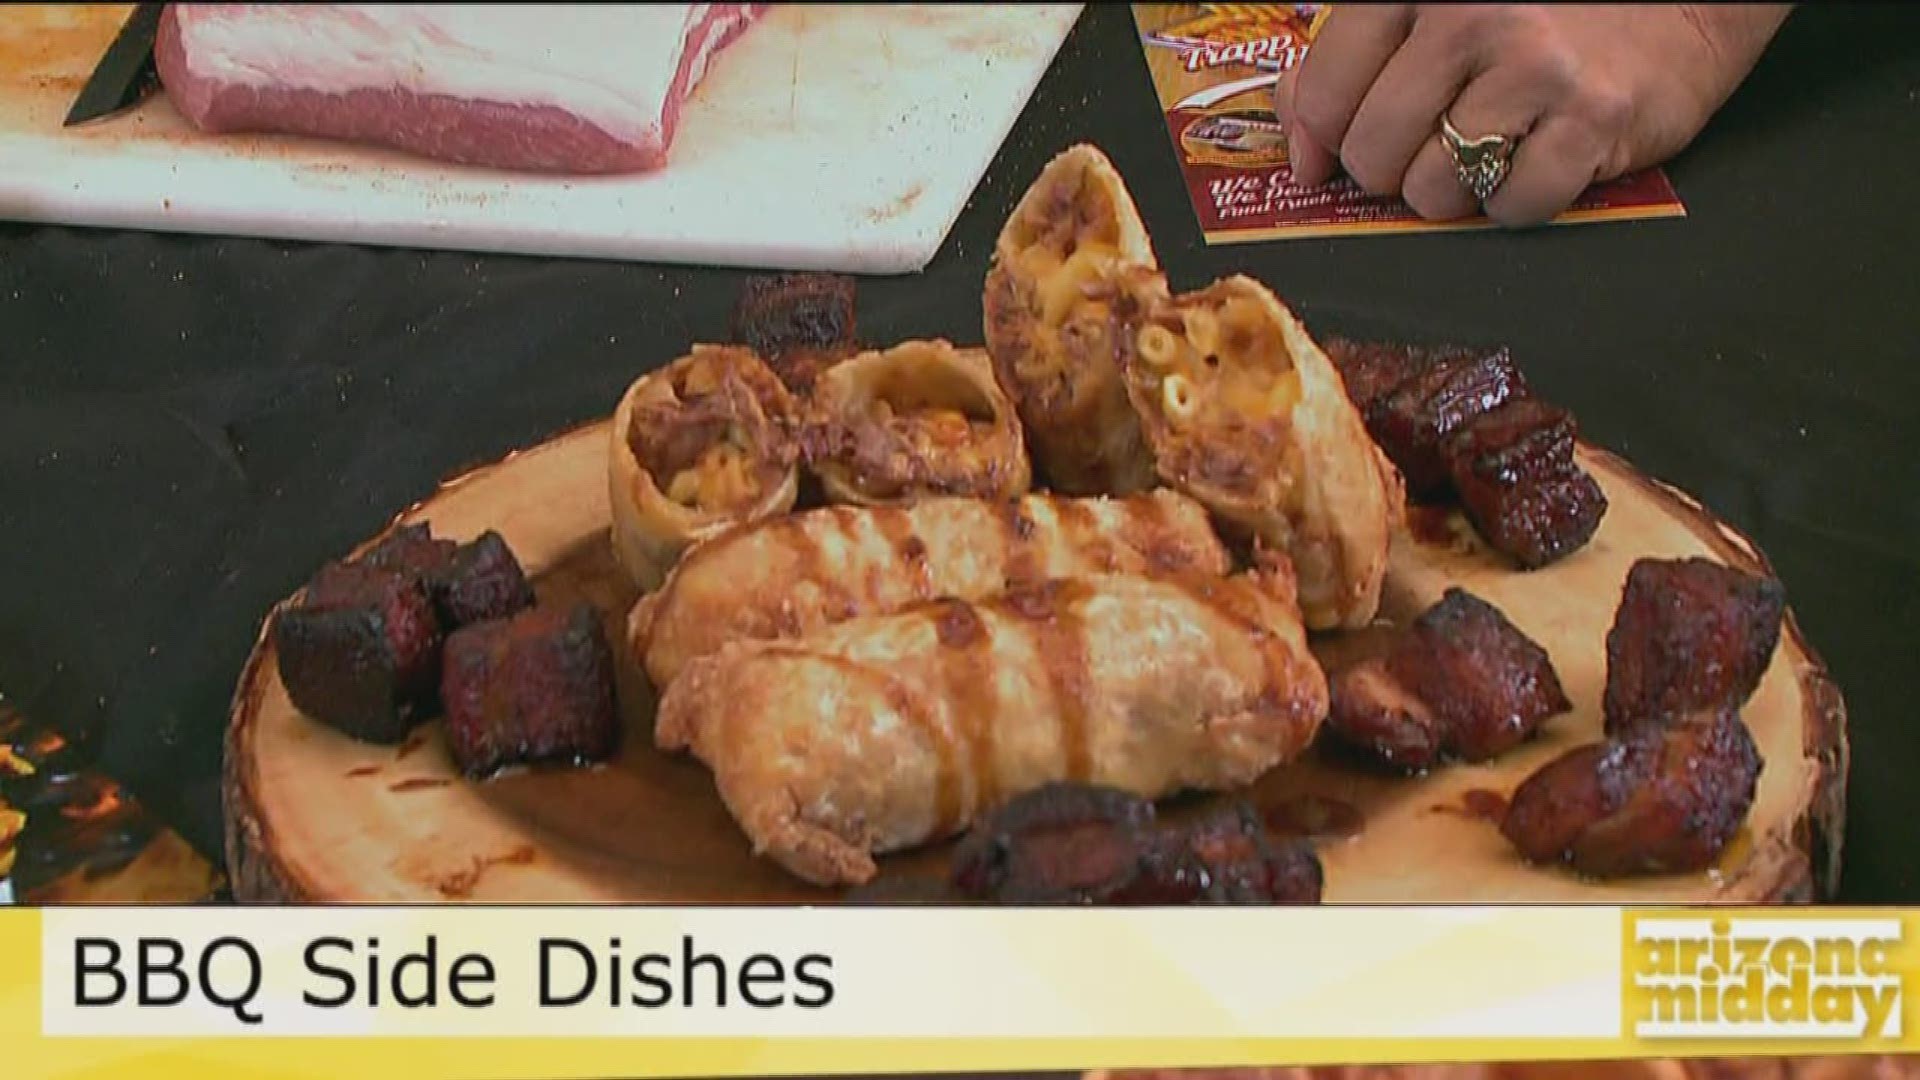 Phil the Grill Johnson from Trapp Haus BBQ is showing us some delicious side dishes from deep fried mac and cheese eggrolls to a classic coleslaw